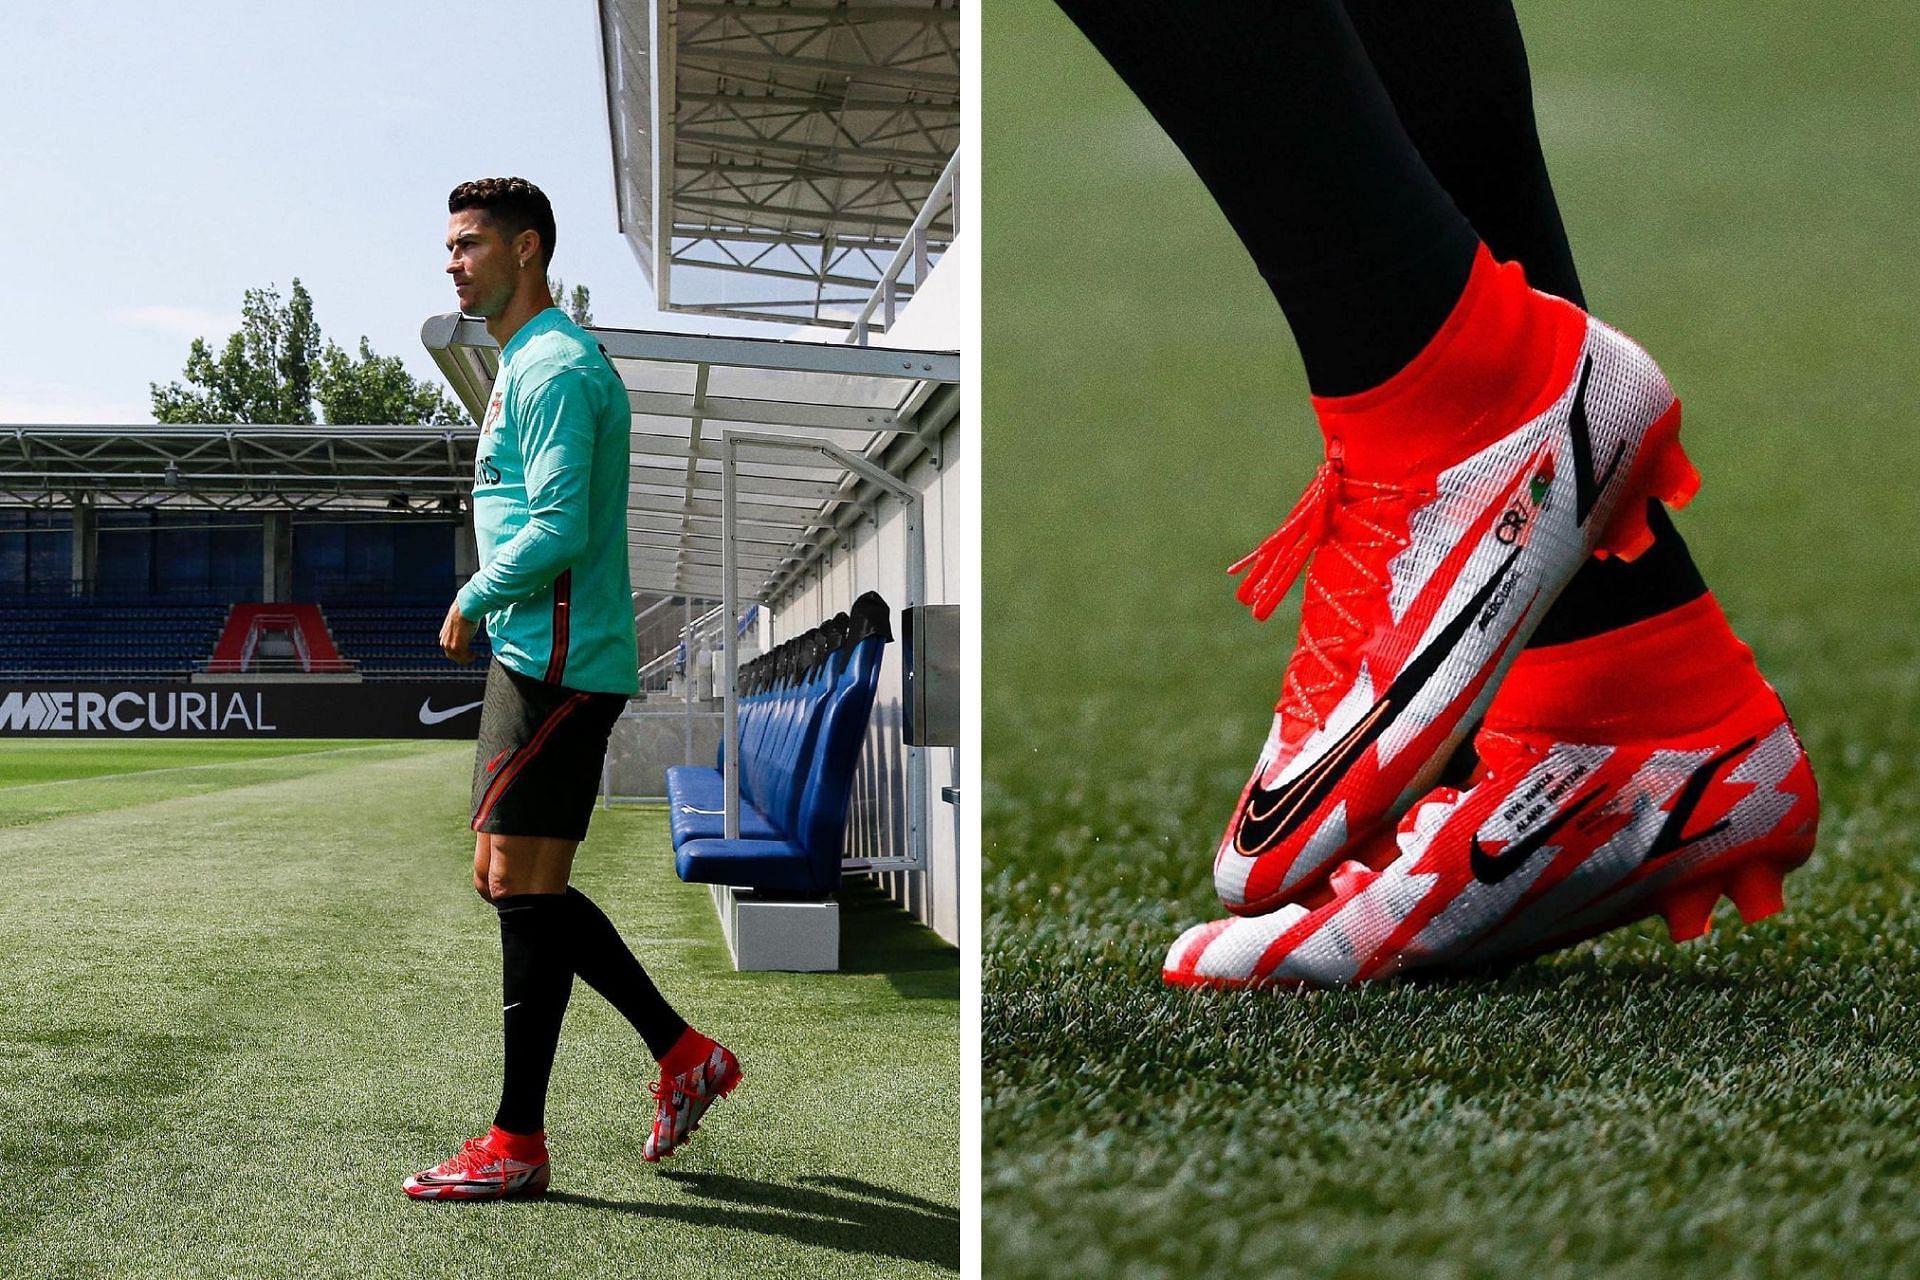 leven tegel Haven Nike: 5 best football shoes worn by Cristiano Ronaldo